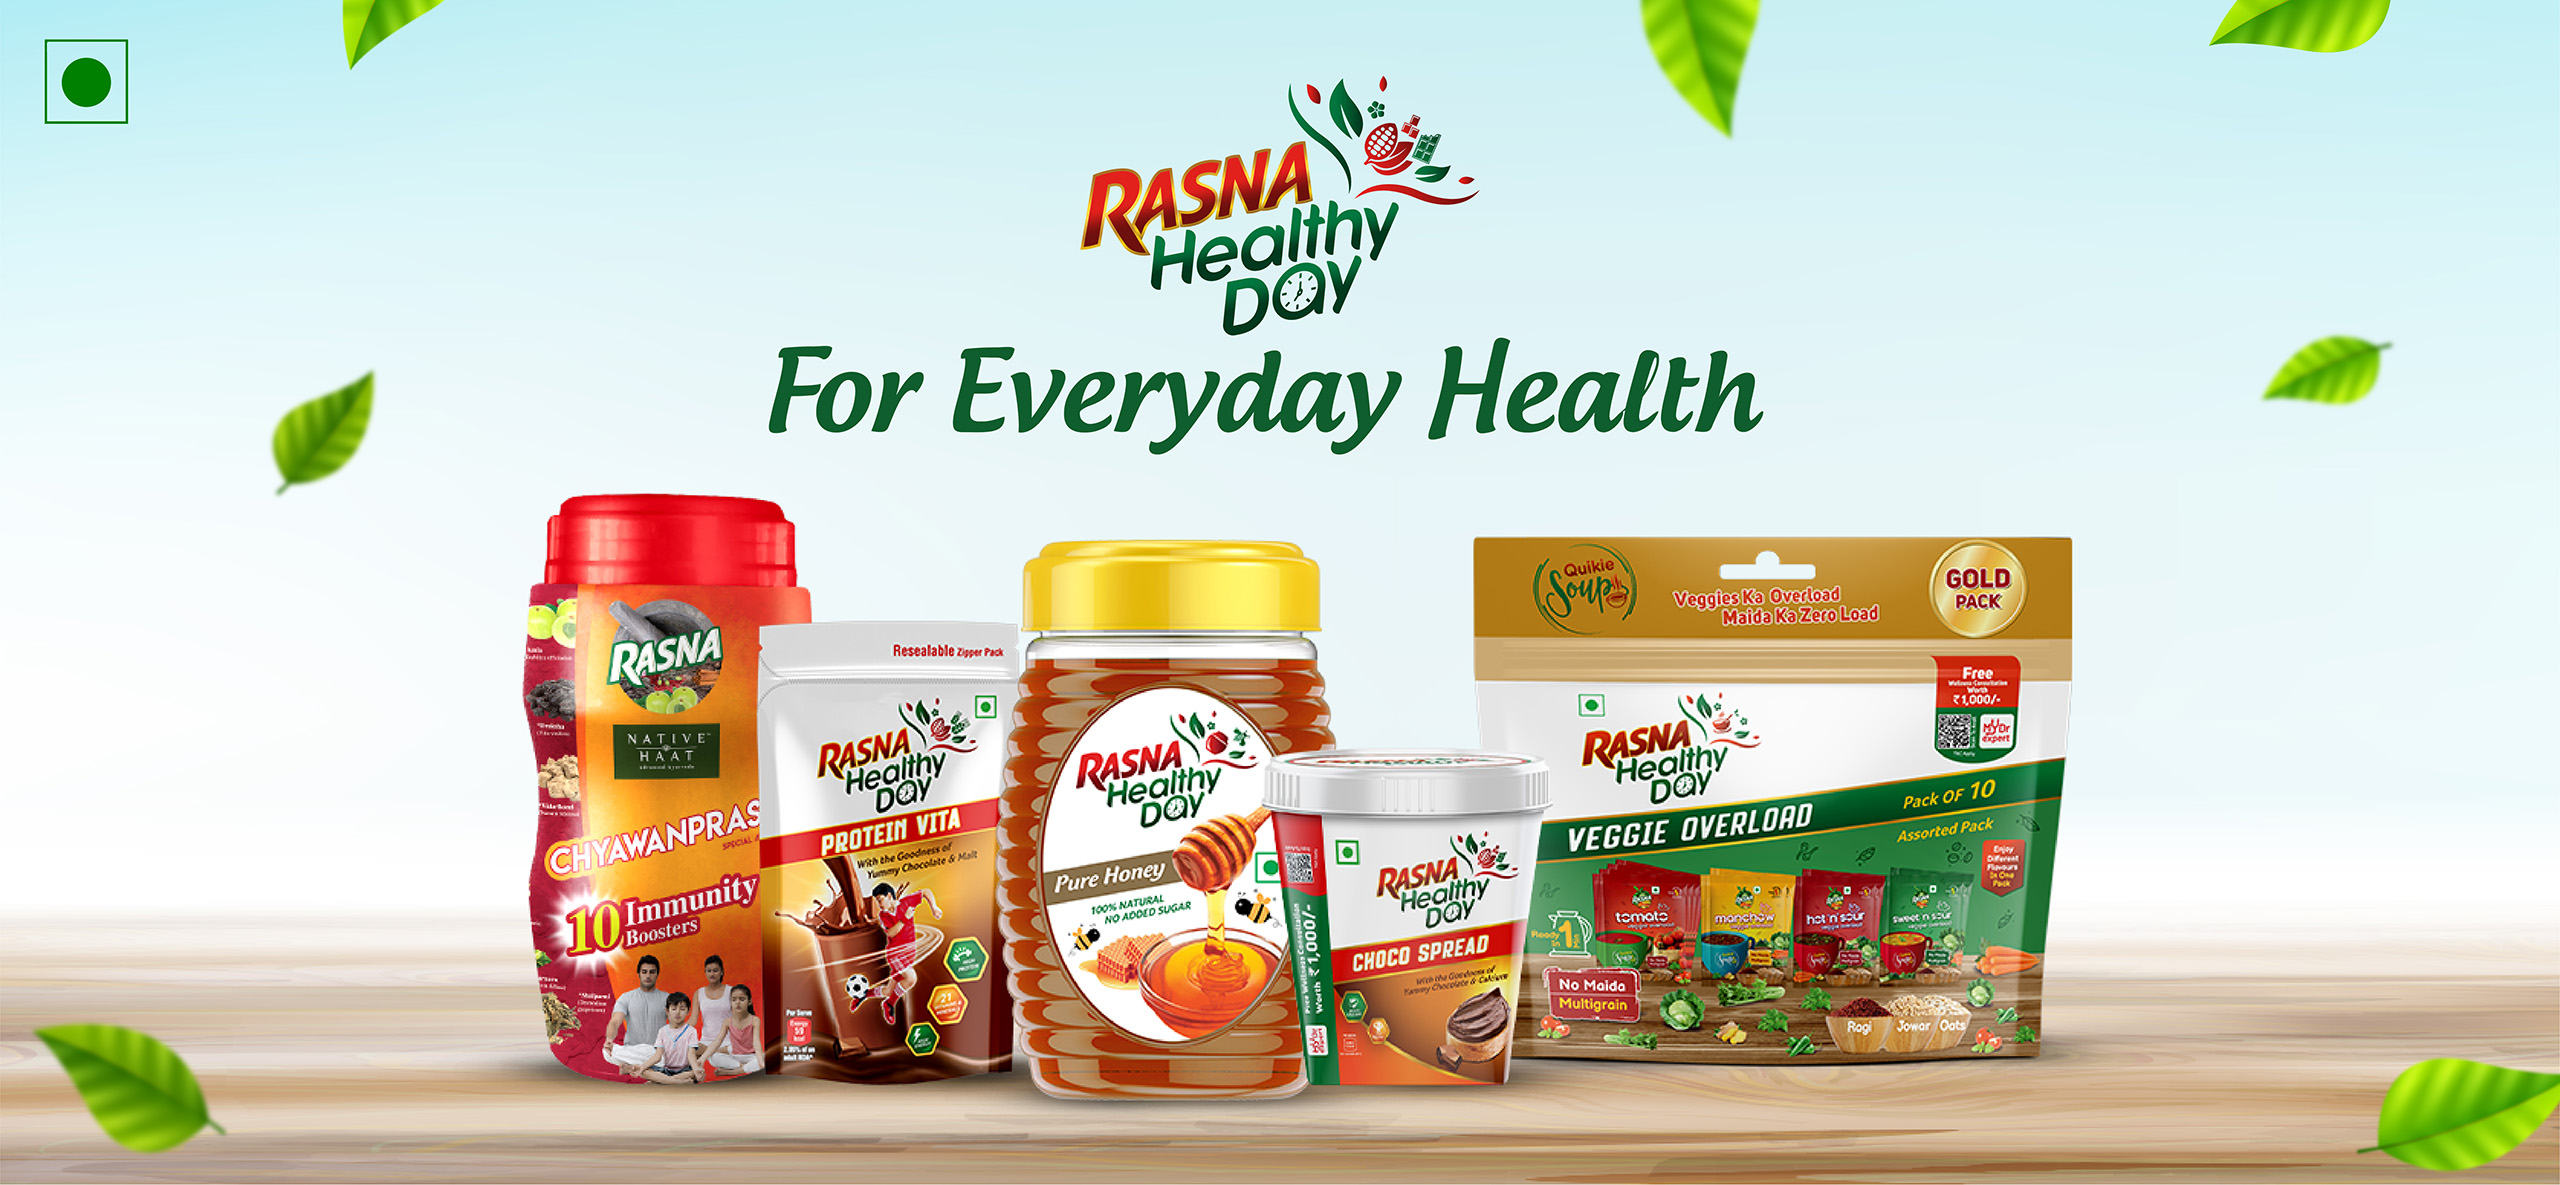 Rasna International - India's most loved instant drink mix and wellness brand